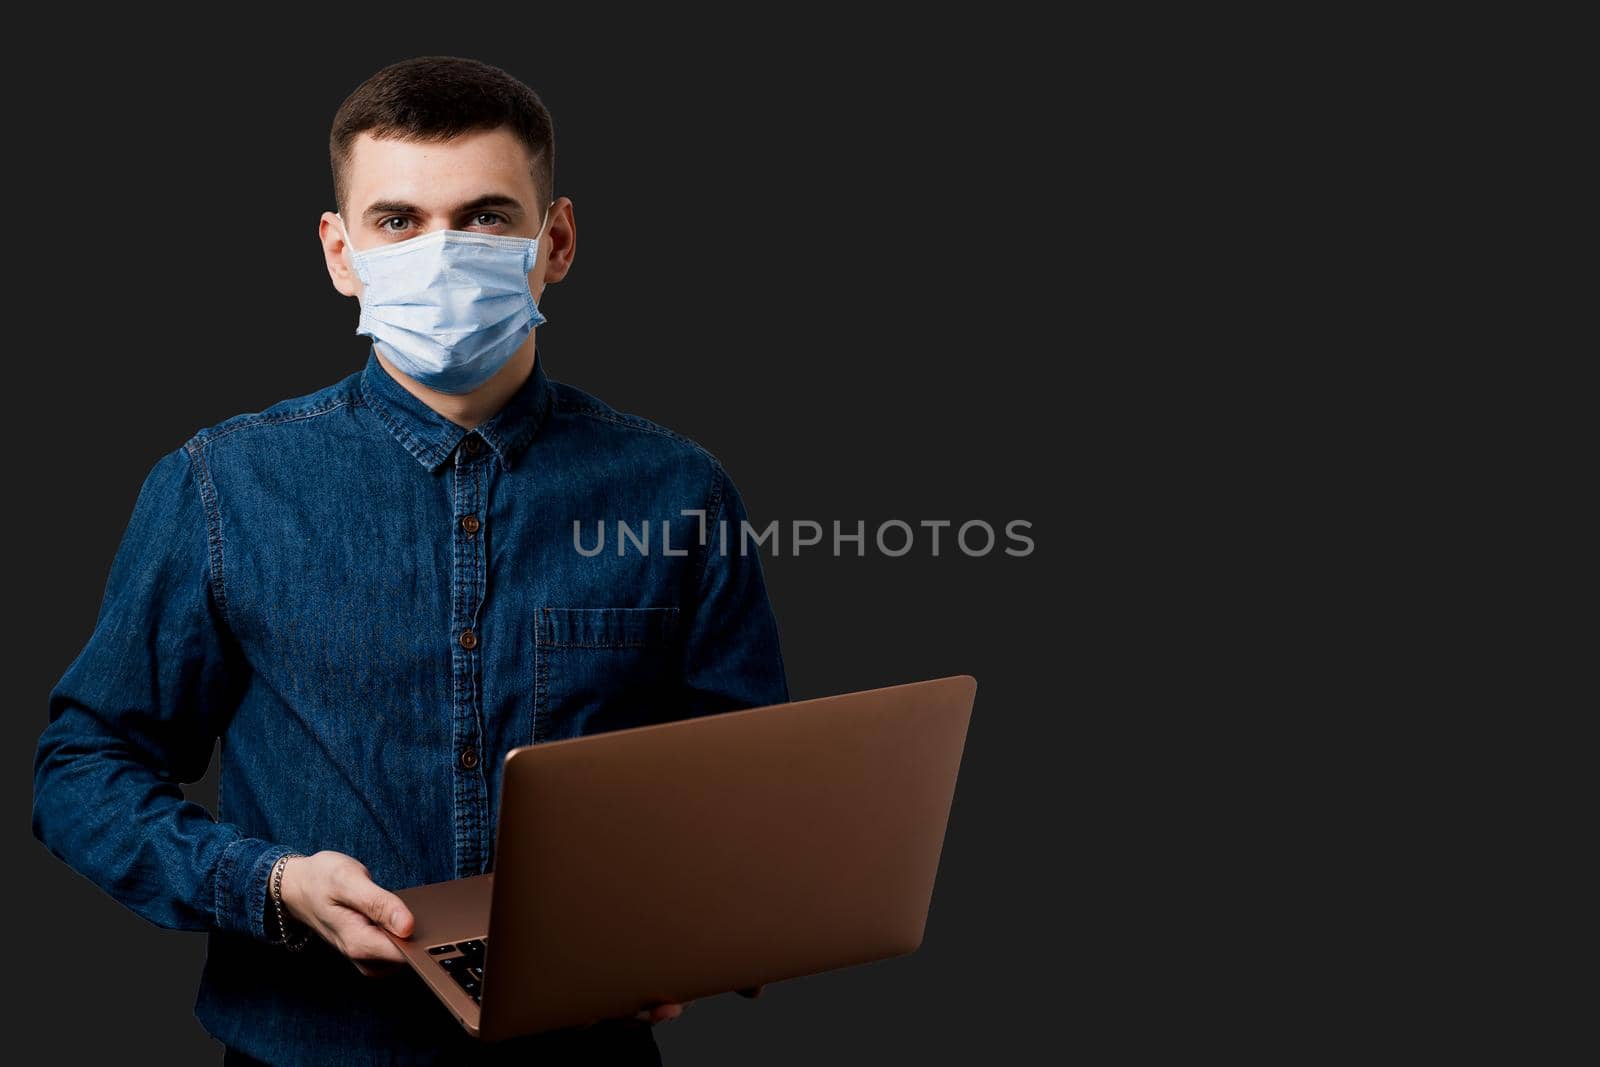 Education and working on-line at quarantine coronavirus covid-19 period. Man in medical mask with laptop on black background.